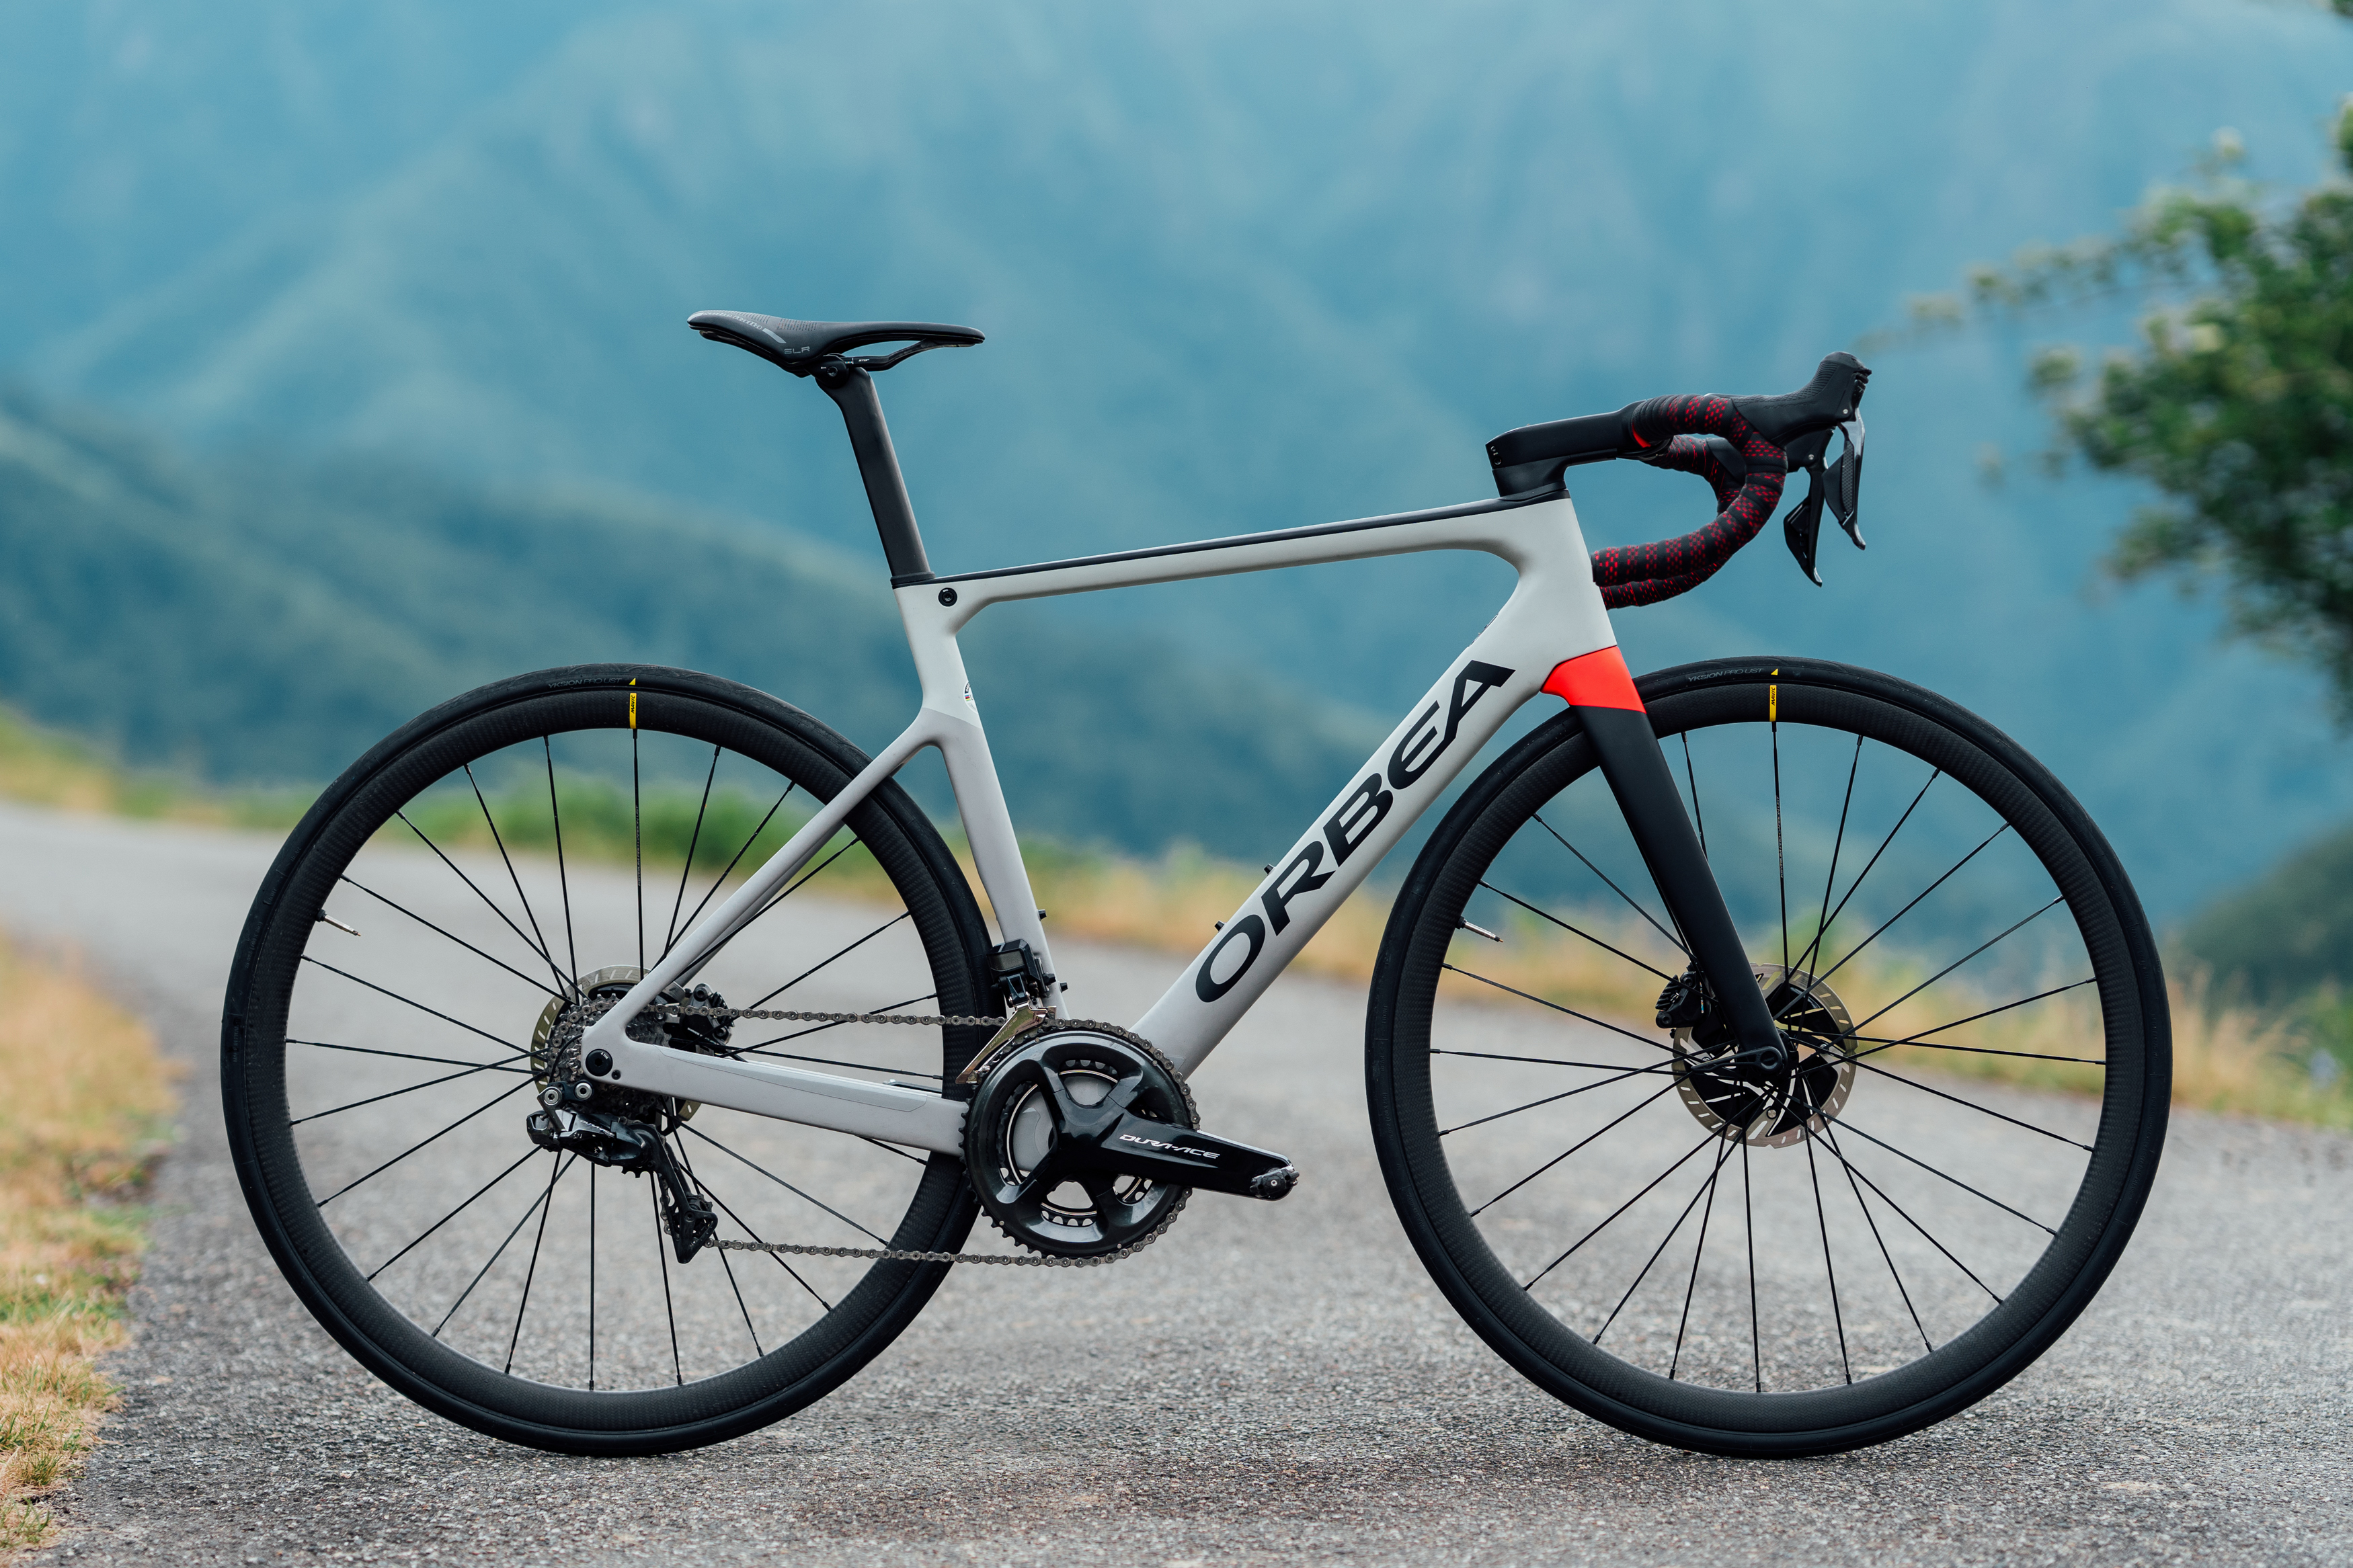 New Orbea Orca OMX is more aerodynamic, disc brake only, & offers "street nature" style